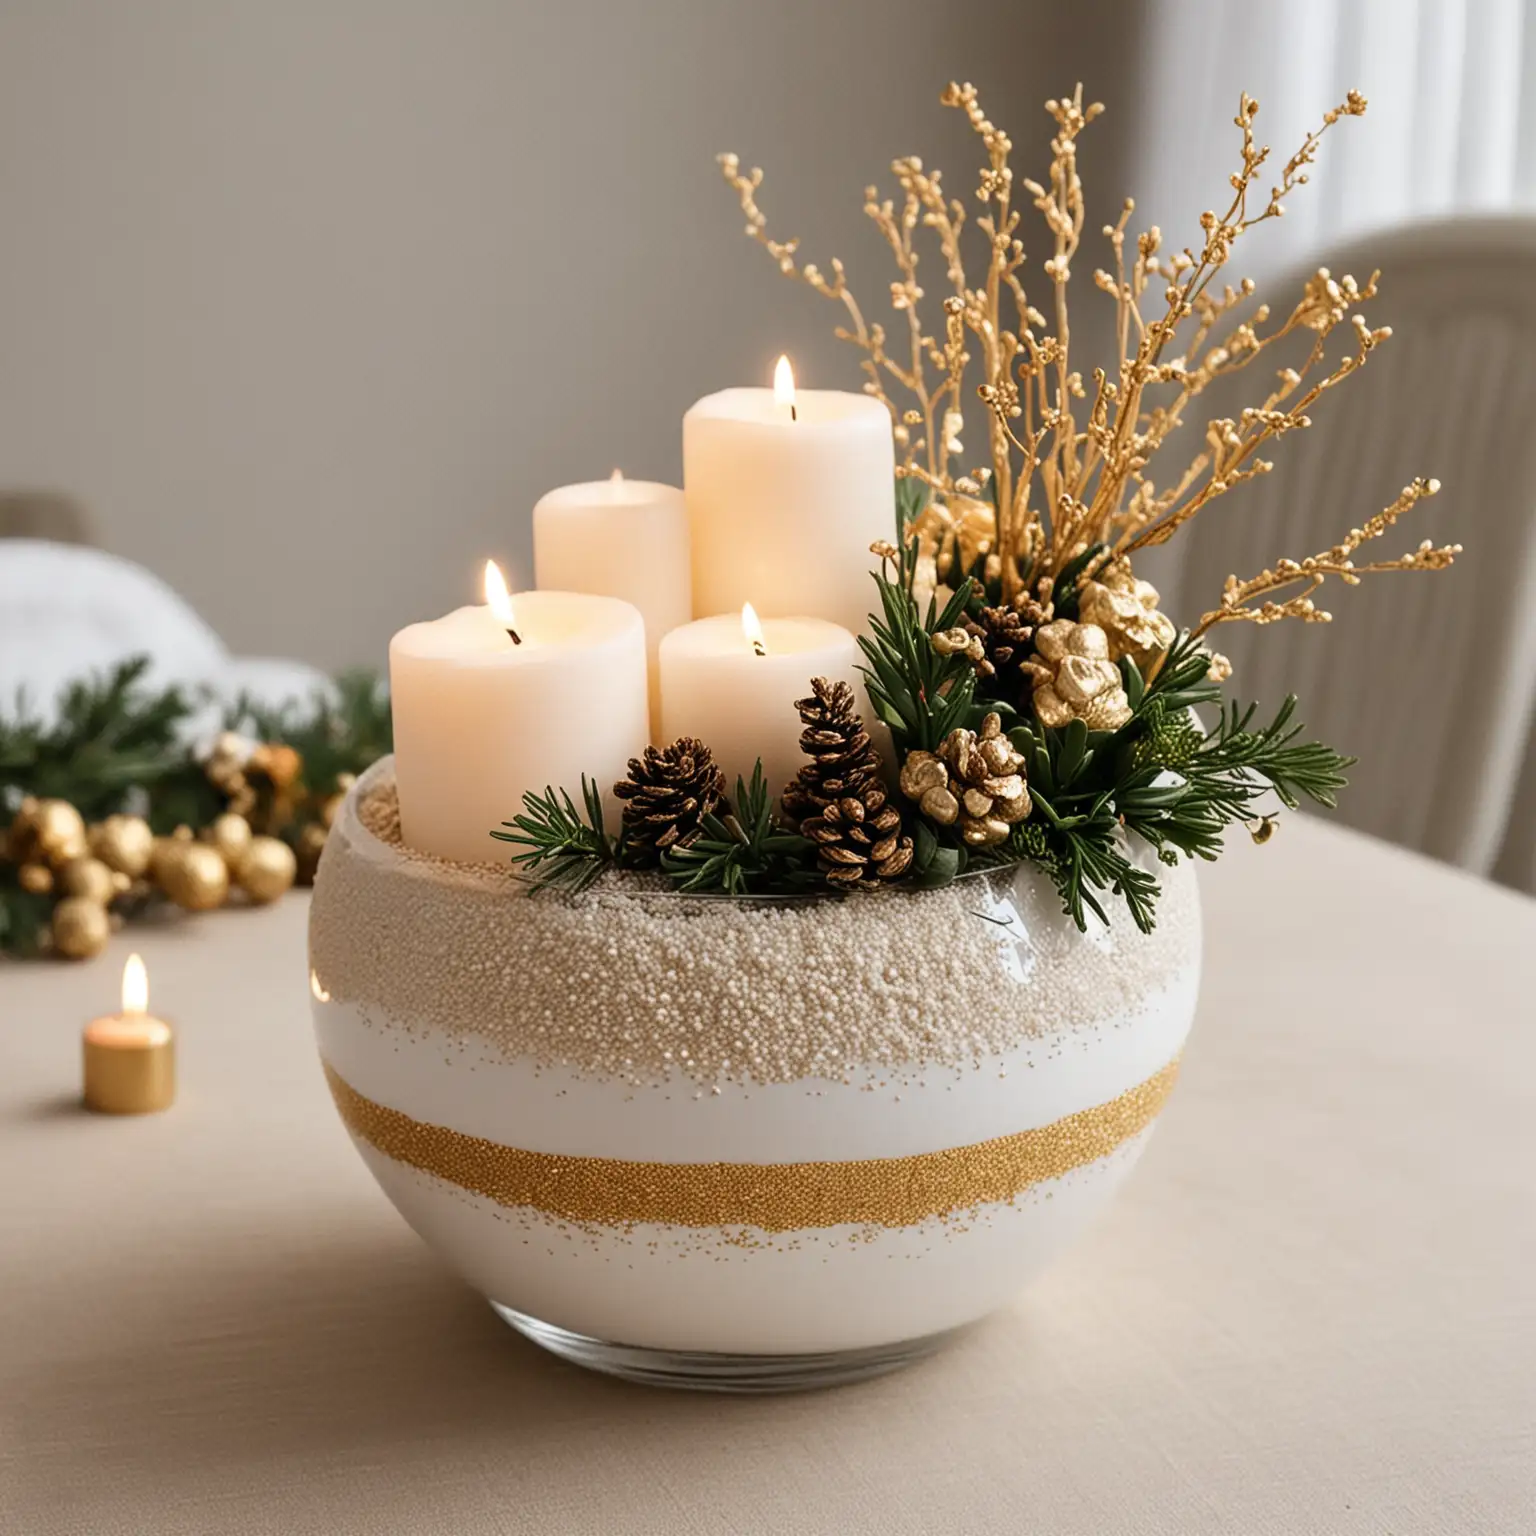 small and simple DIY elegant winter centerpiece with a white fishbowl vase and gold sand